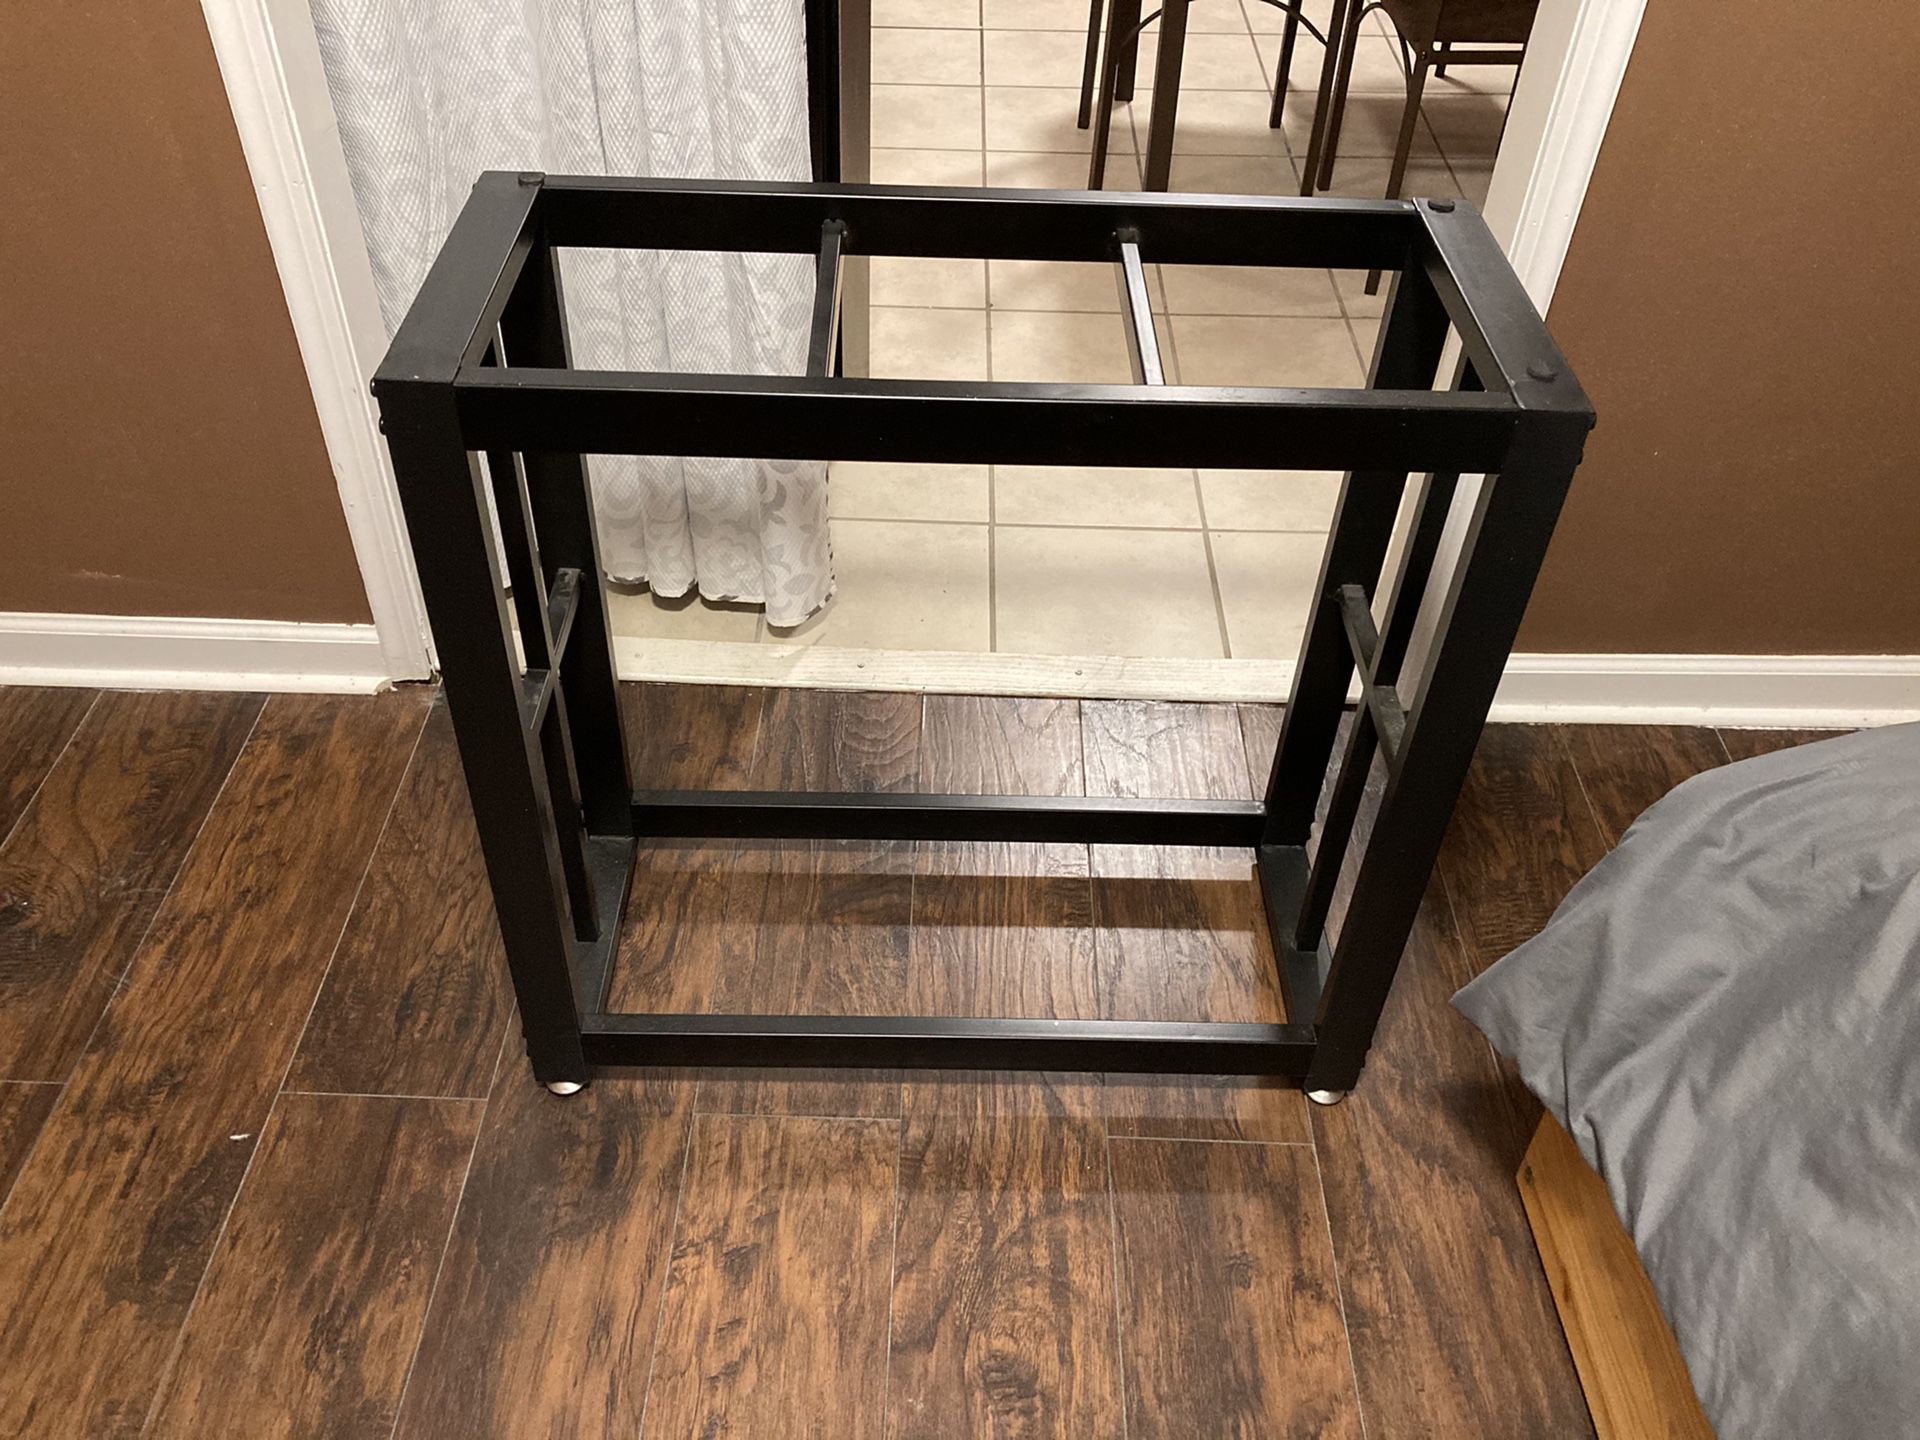 Fish tank stand 50 gallons